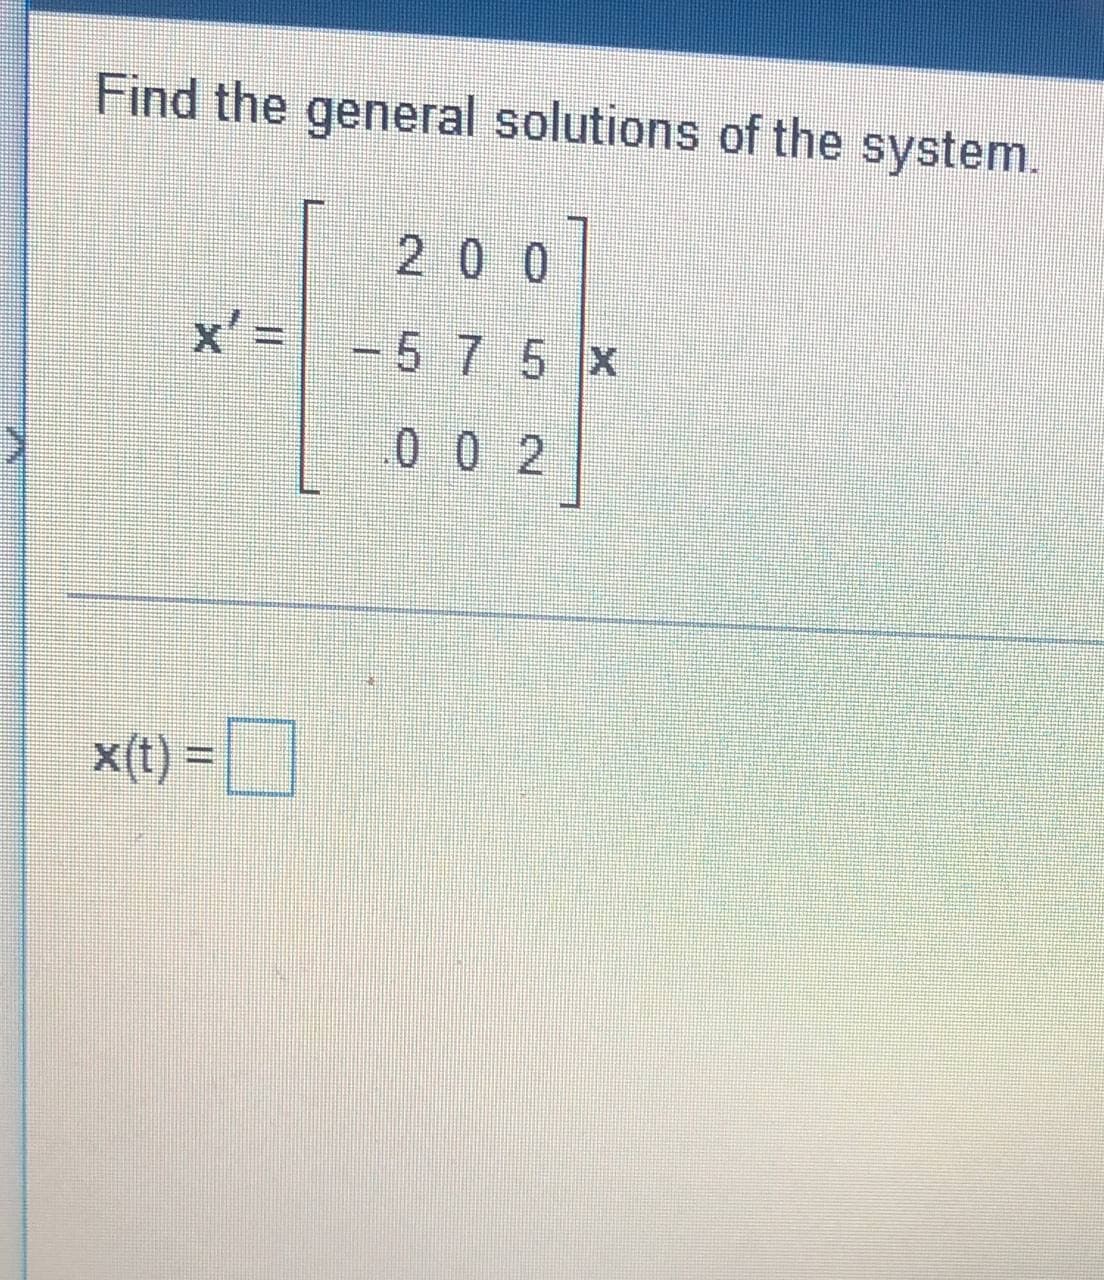 Find the general solutions of the system.
200
-
-5 7 5 x
0 0 2
x(t) =